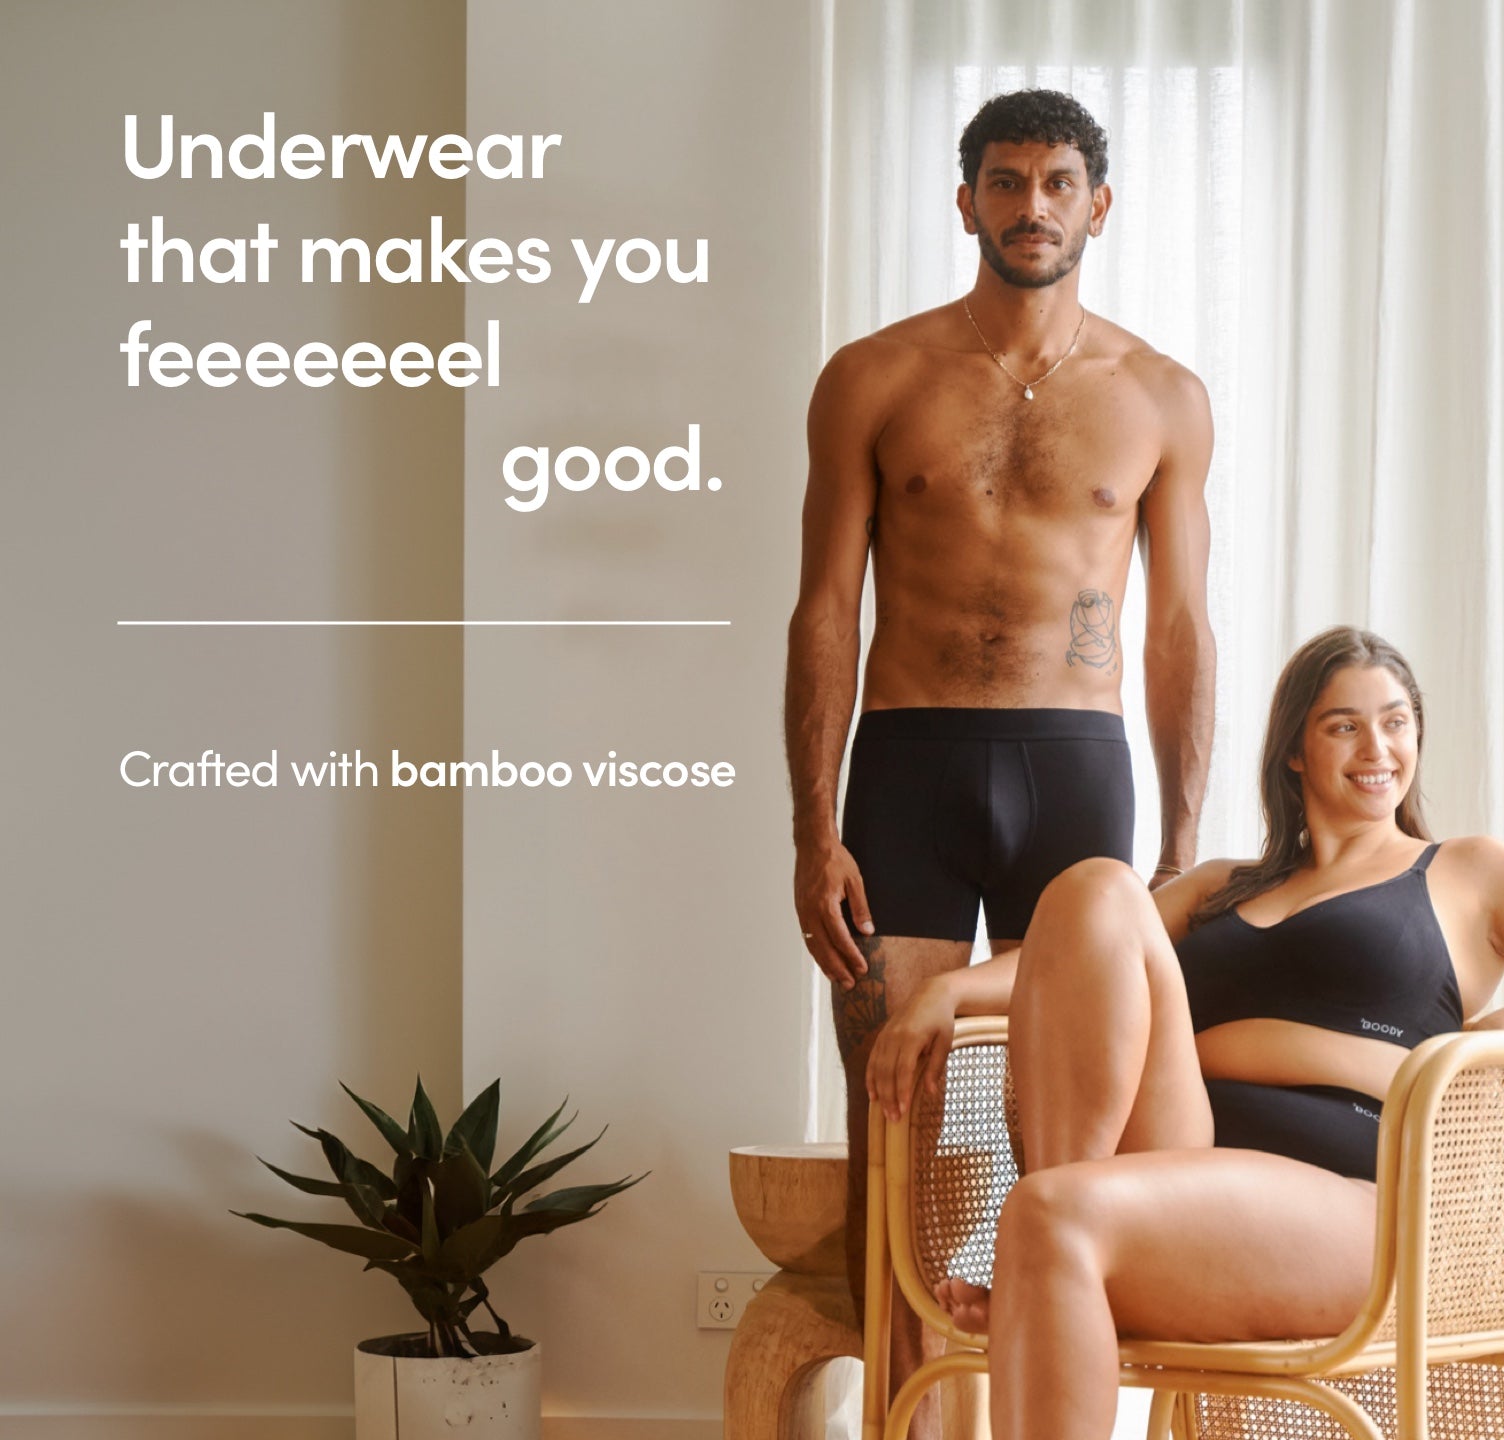 Clothing & Shoes - Socks & Underwear - Shapewear - Hue Super Opaque Tights  - Online Shopping for Canadians